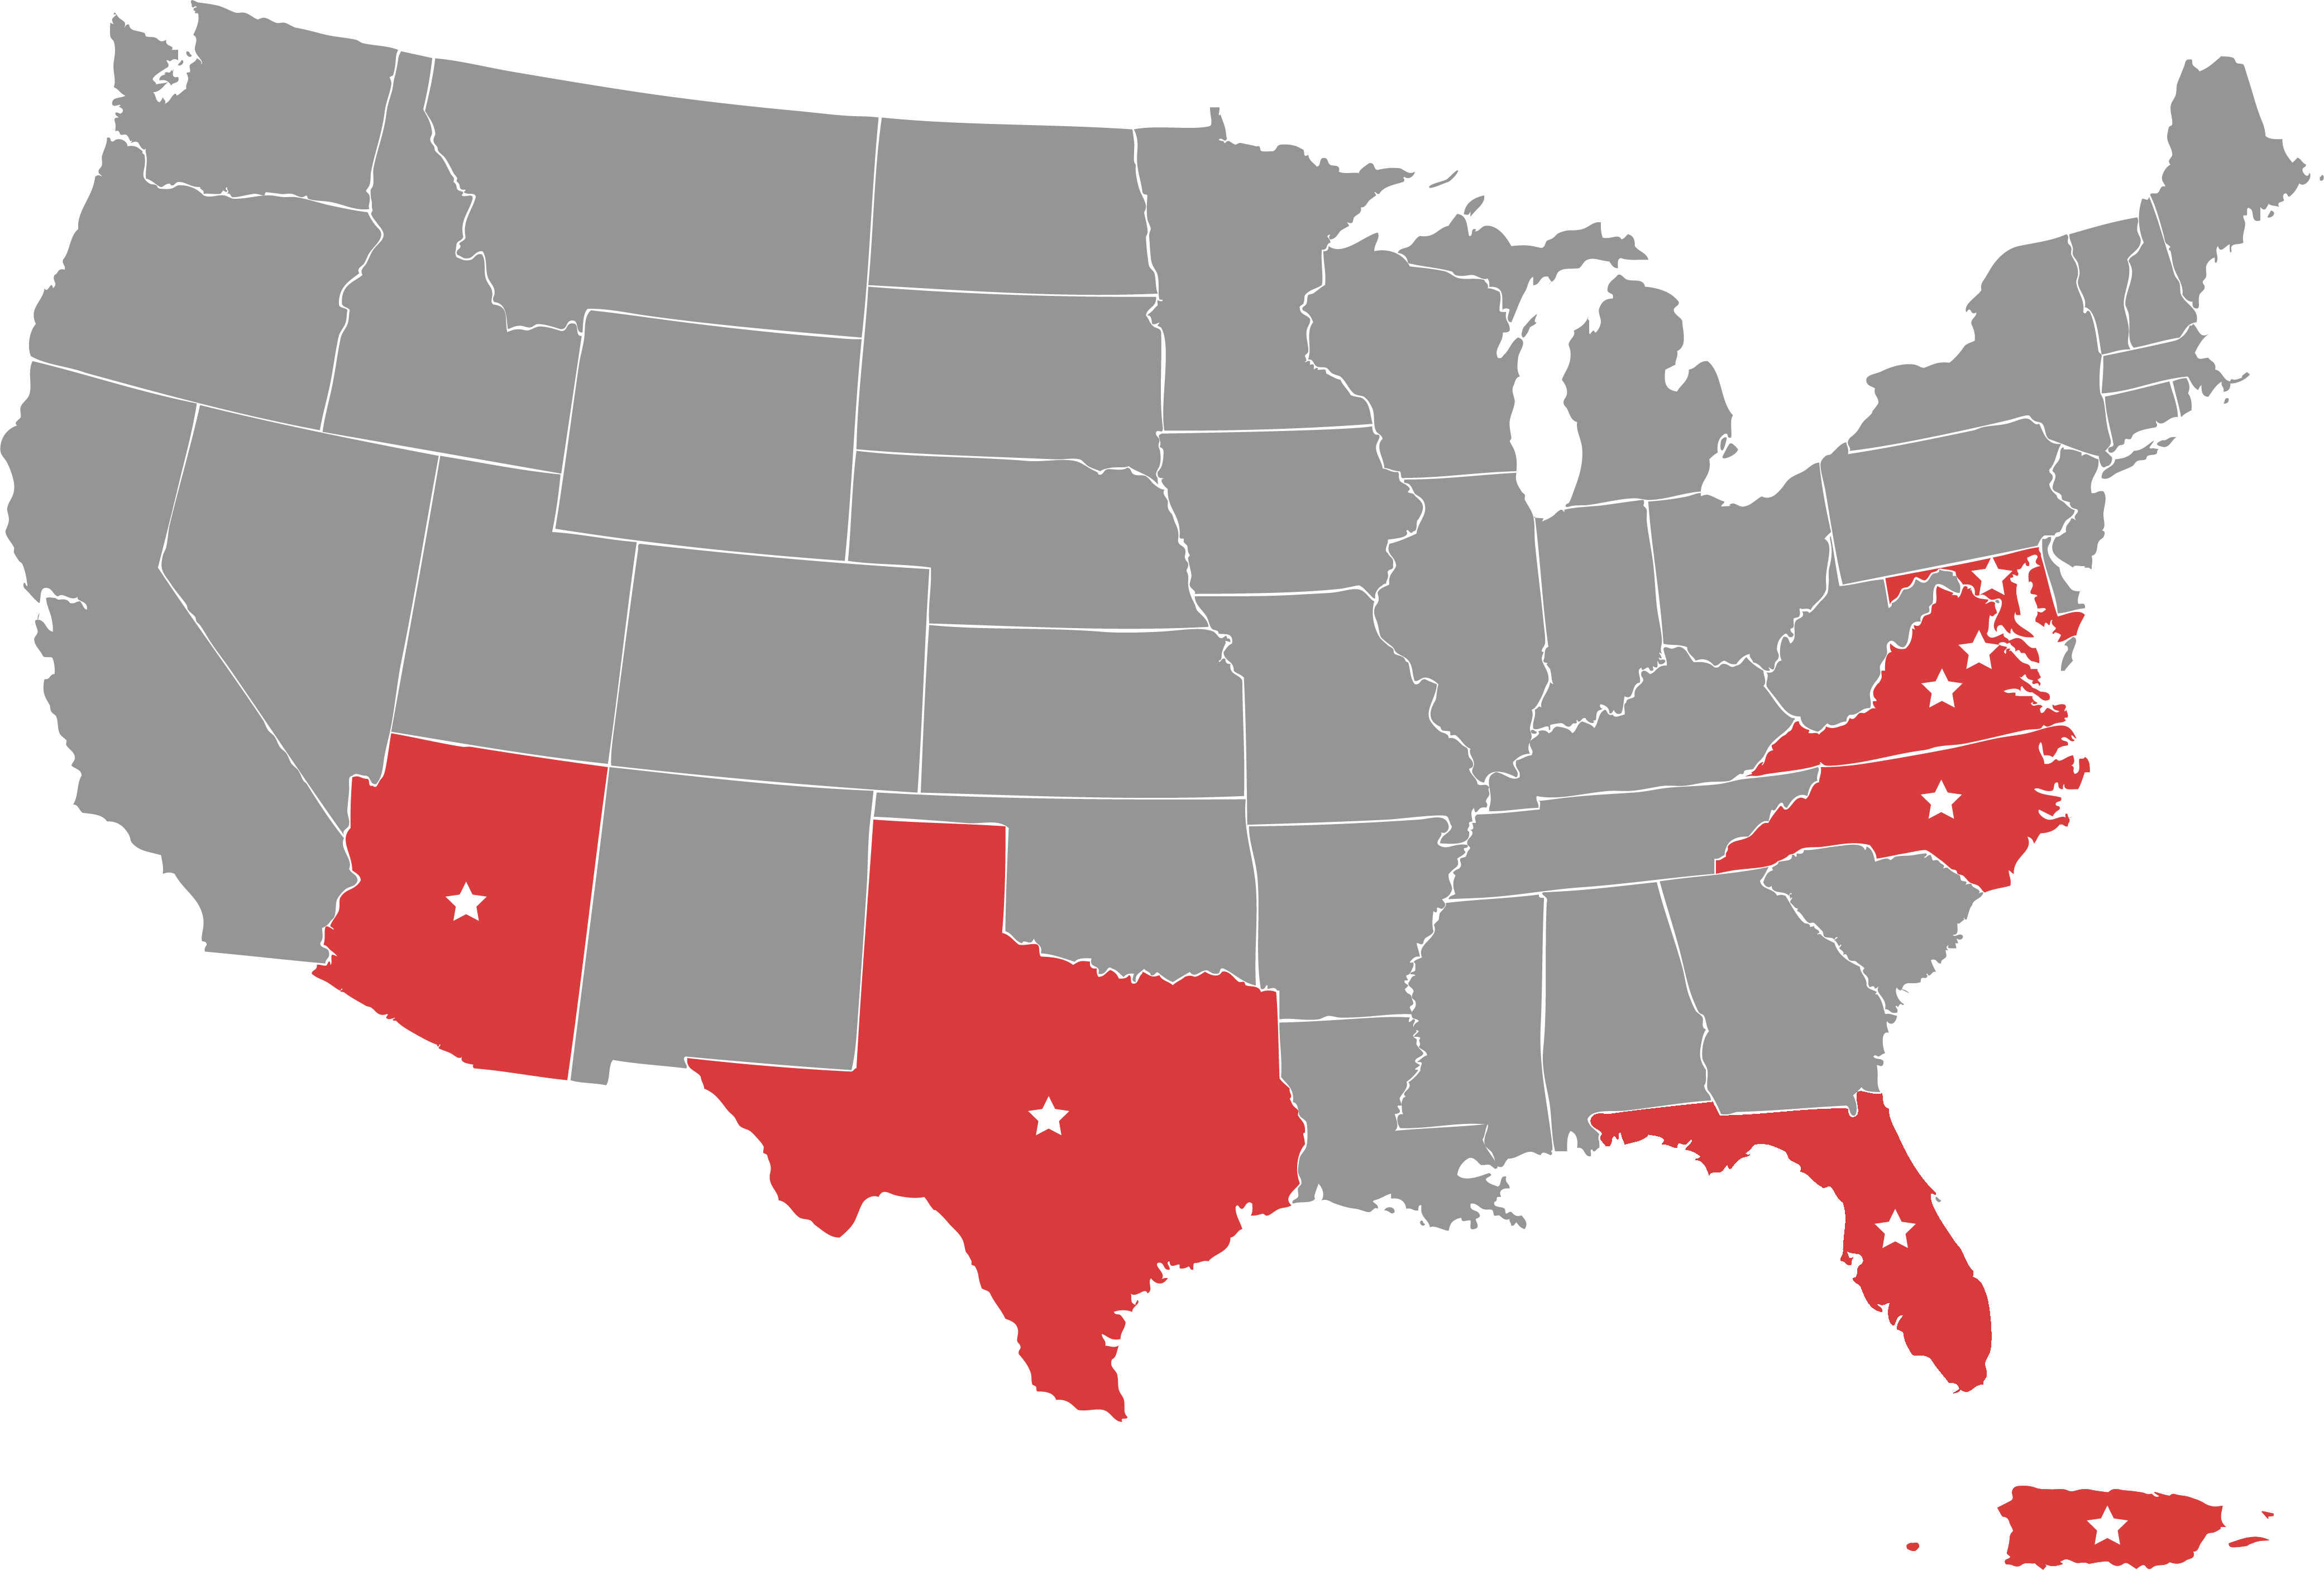 US Vector Map showing marked landmarks